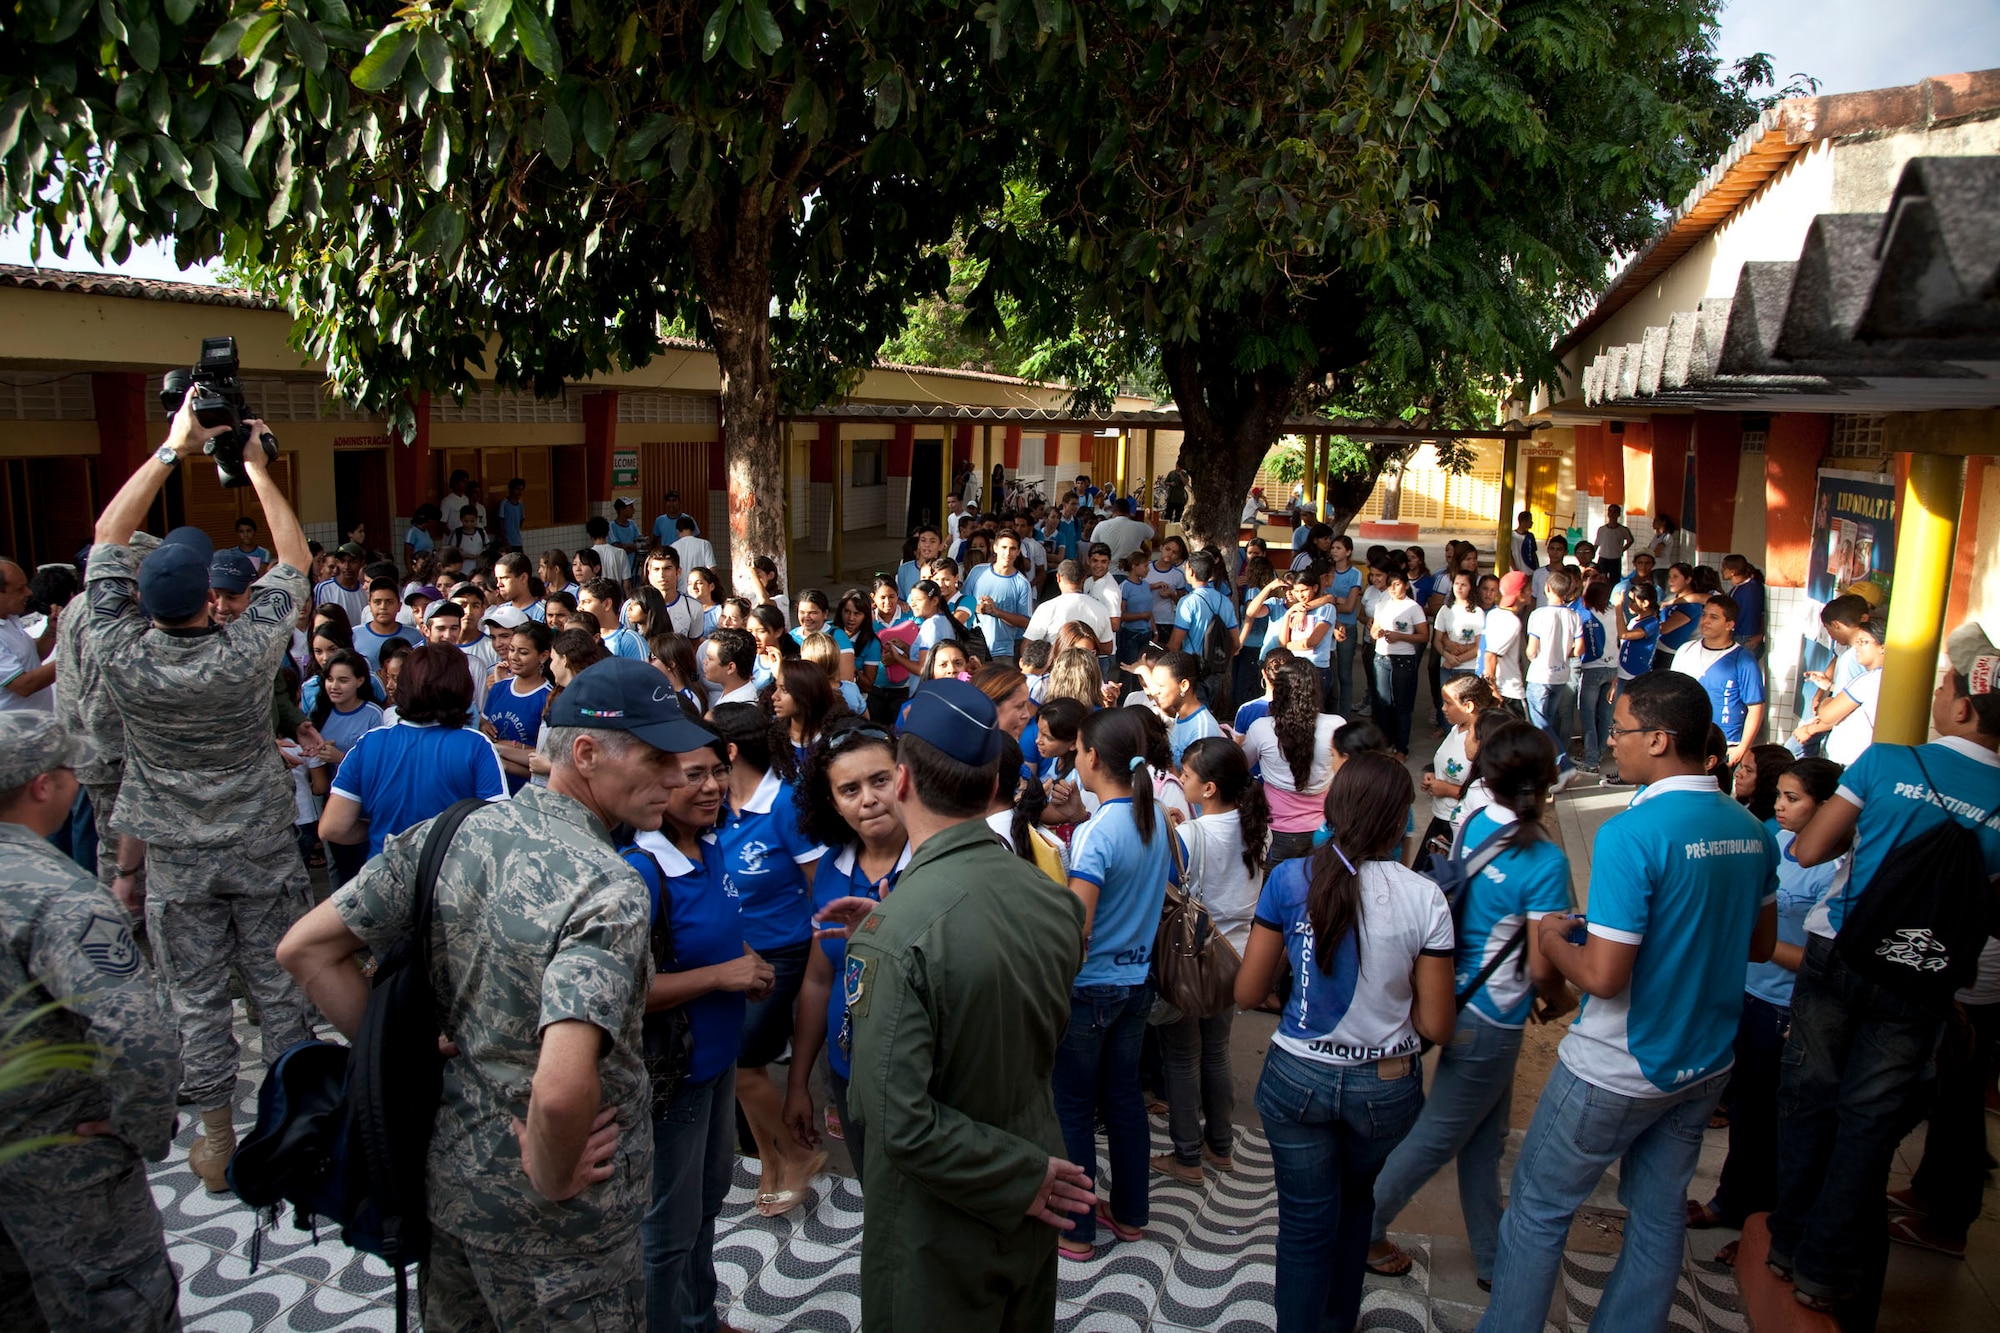 A group of more than 15 airmen visited the local school of Eliah Maia do Rego, Natal Brazil, building community relations during CRUZEX V. During the visit the airmen interacted with the students on an informal basis; distributed small gifts and took group pictures. CRUZEX V, or Cruzeiro Do Sul (Southern Cross), is a multi-national combined exercise involving the Air Forces of Argentina, Brazil, Chile, France and Uruguay, , and observers from numerous other countries with more than 82 aircraft and almost 3,000 Airmen involved. (U.S. Air Force photo/Staff Sgt. Michael Matkin)